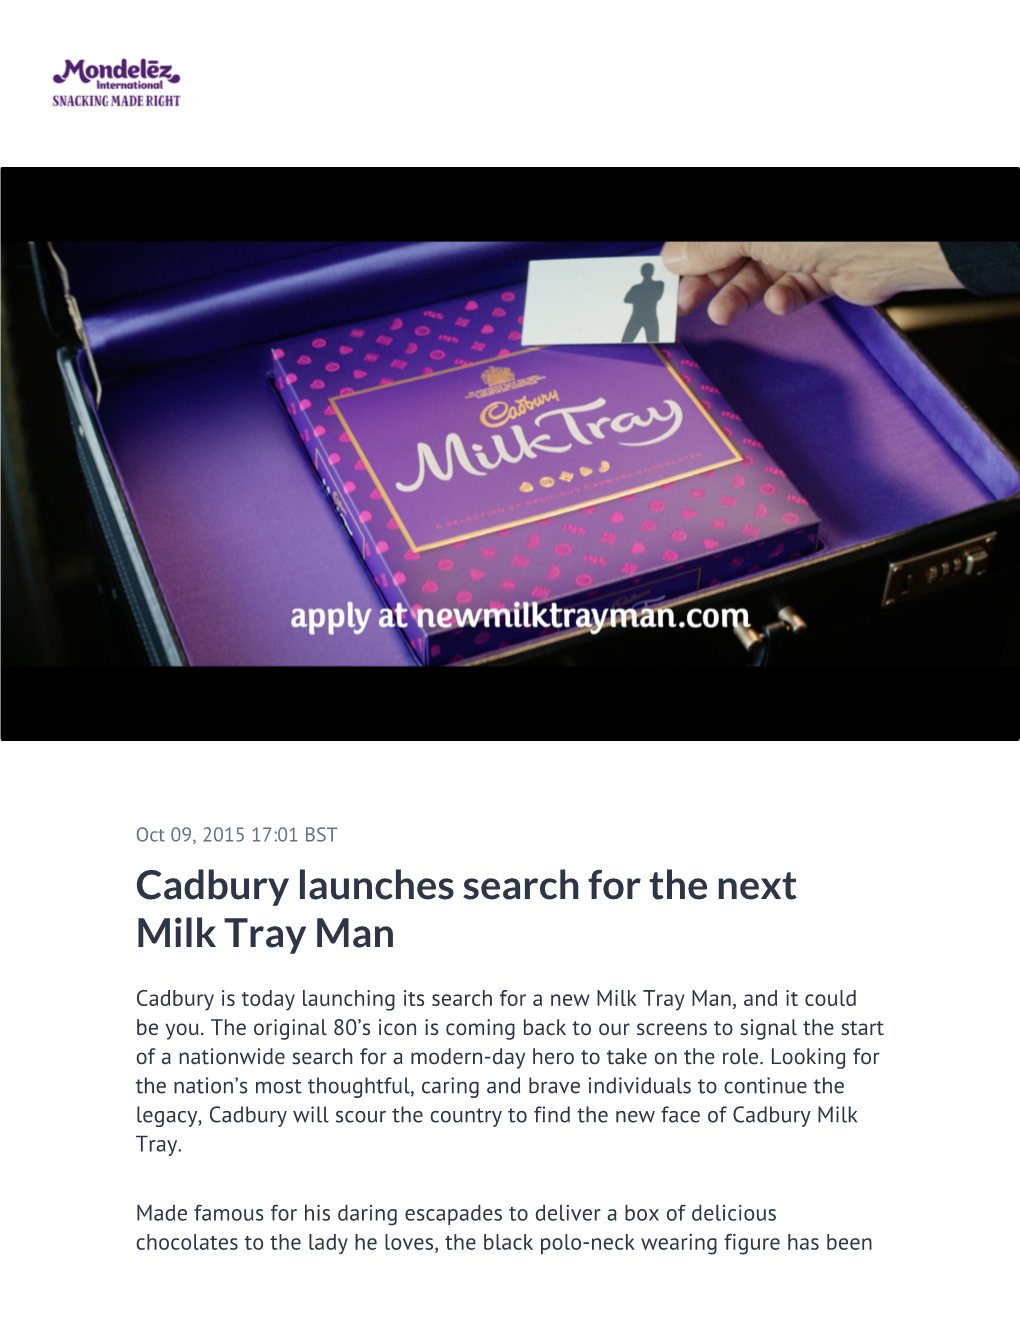 Cadbury Launches Search for the Next Milk Tray Man